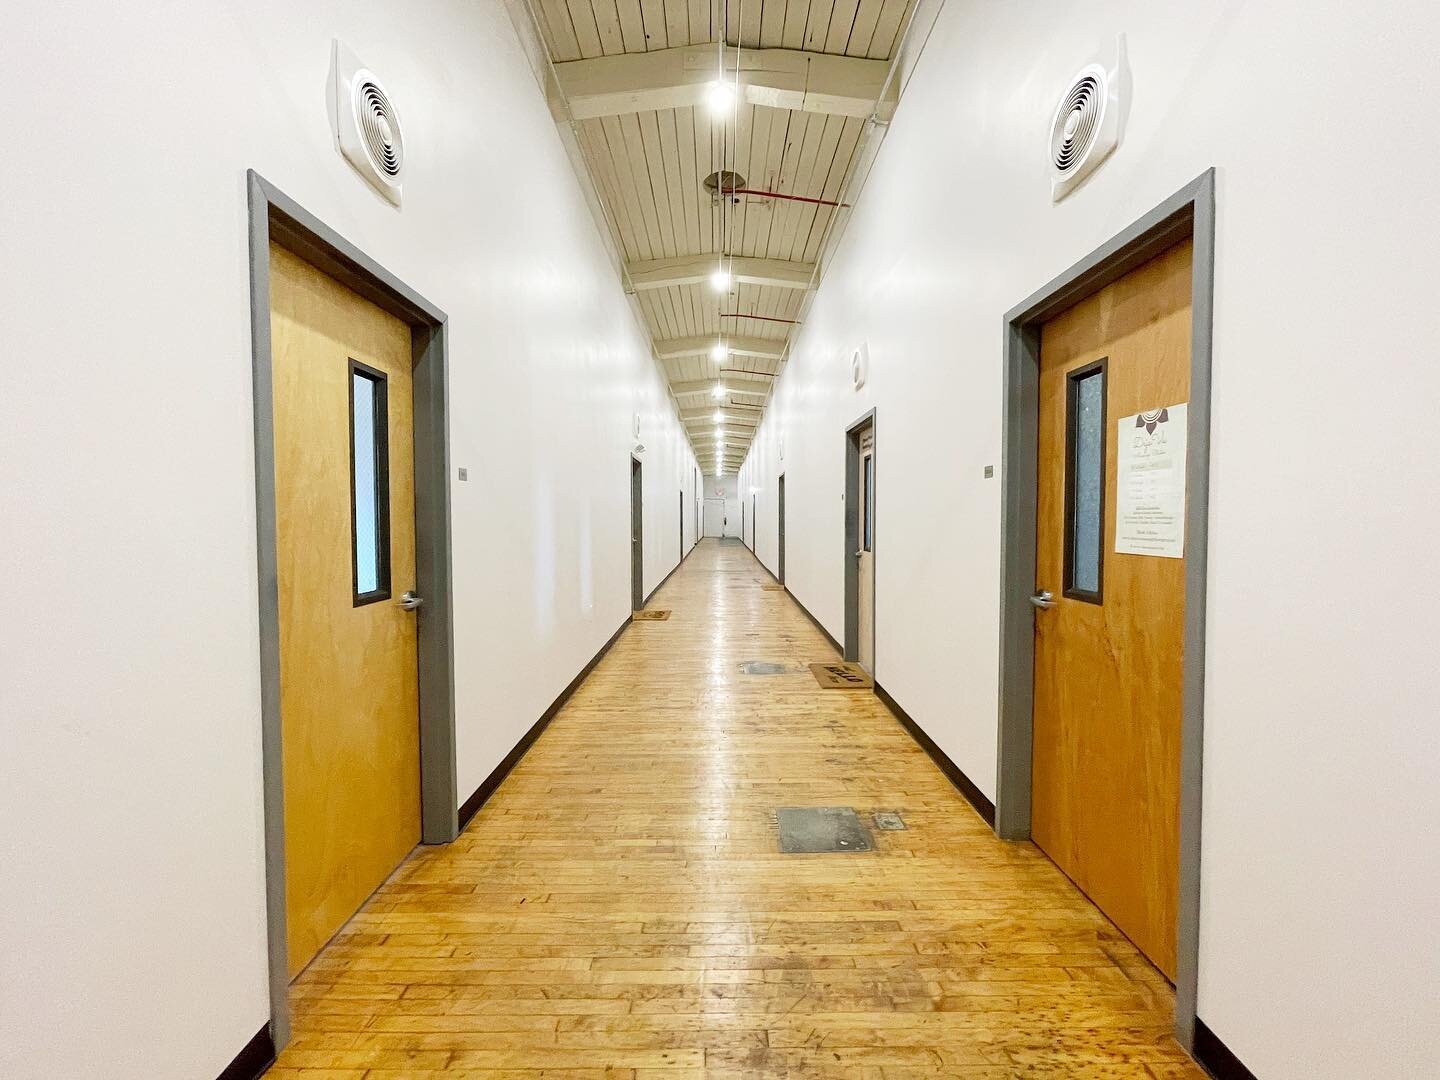 Along these halls you will find limitless creativity, inspiring entrepreneurship, and endless passion. We invite you to join our family at New York Wire Works while you pursue your creative dreams ✨🤝

Learn more at www.newyorkwireworks.com

📸 @newy